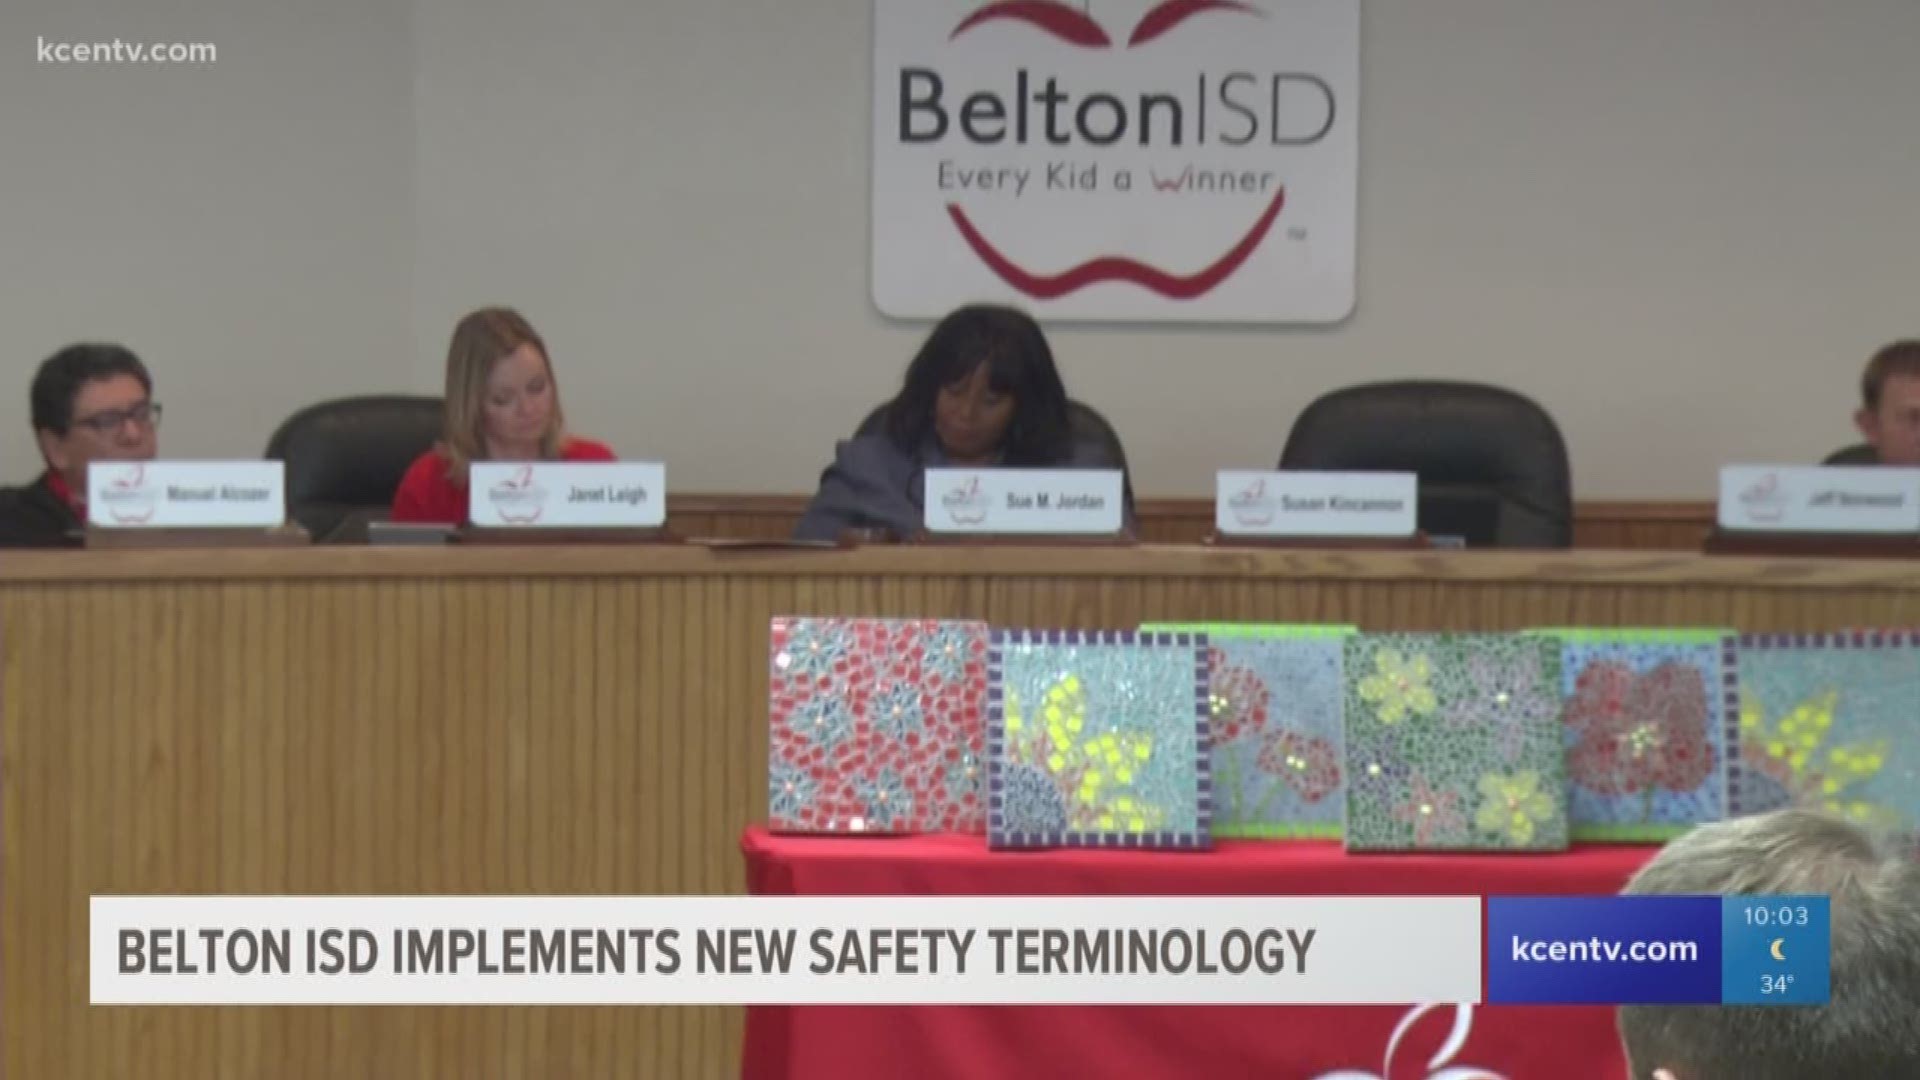 Belton ISD superintendent Susan Kincannon briefed the district school board on new safety terminology the district has adopted.